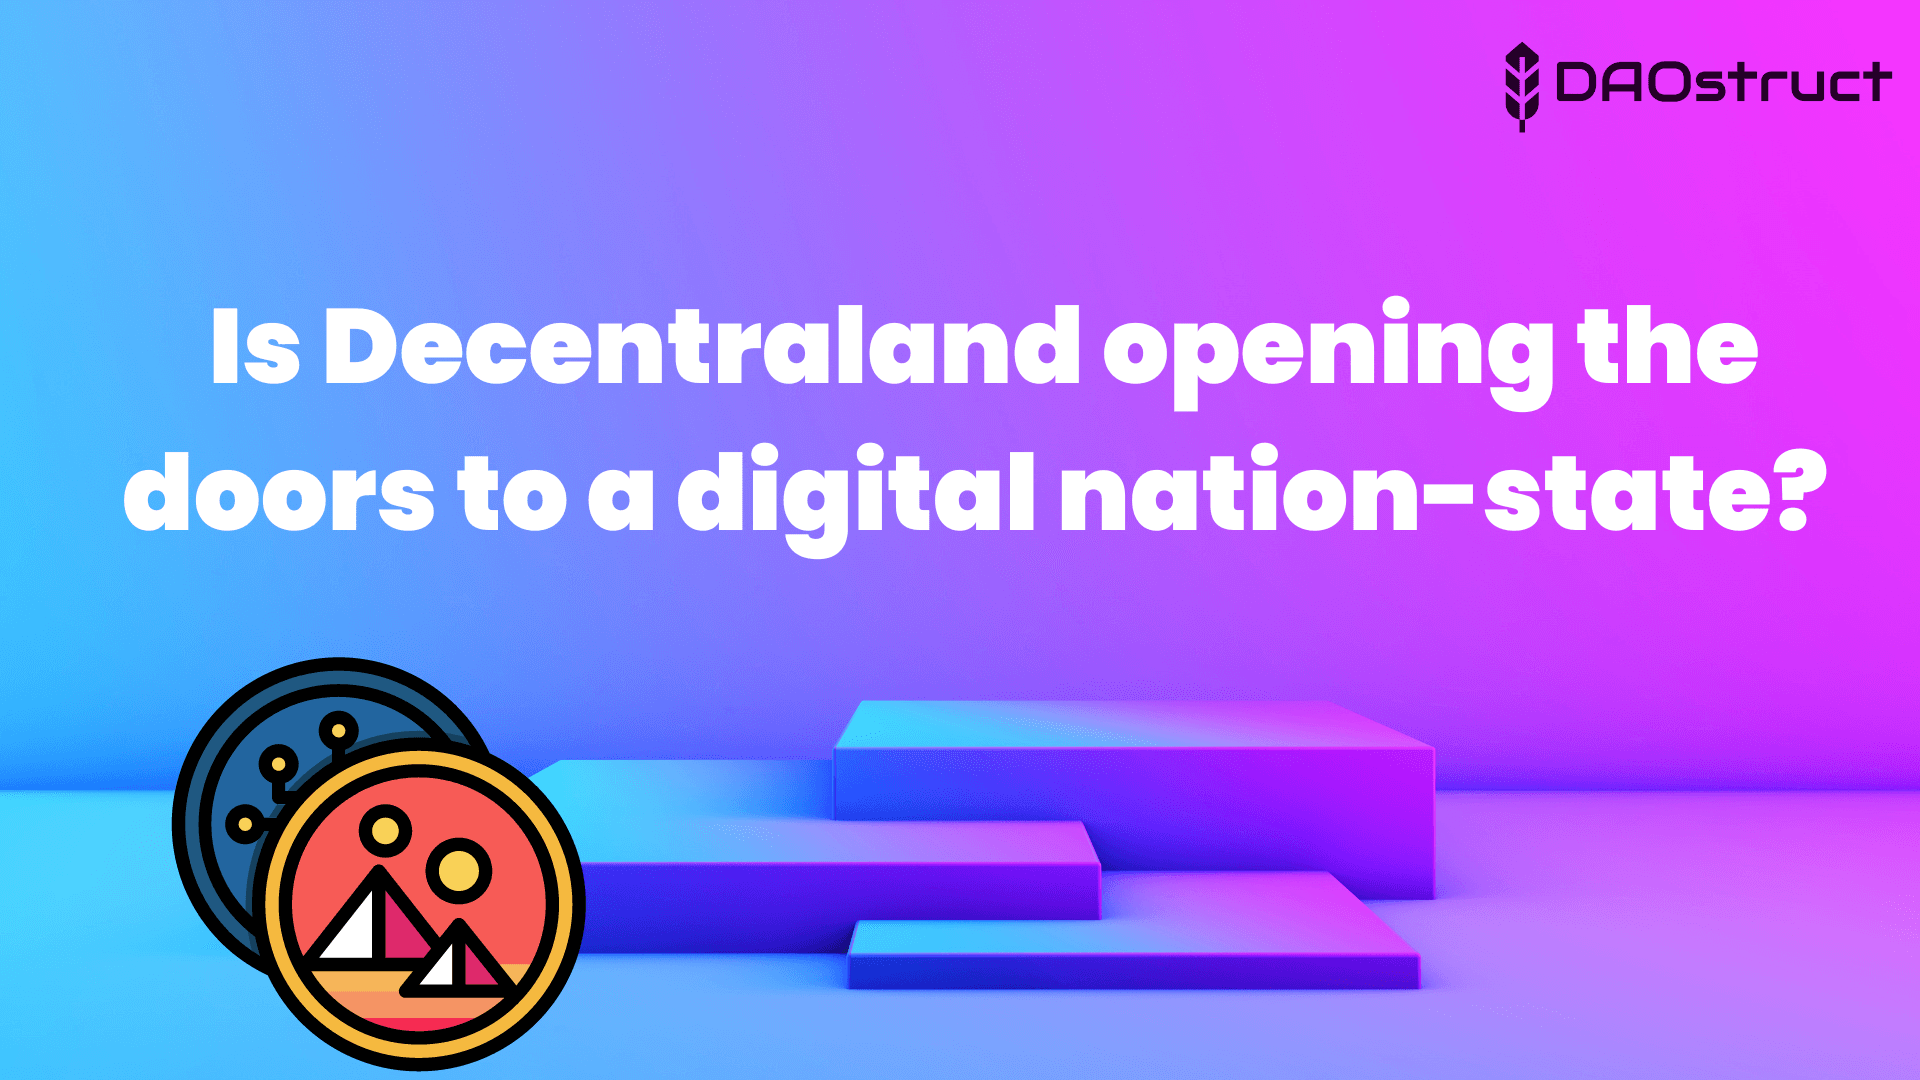  Is Decentraland opening the doors to a digital nation state?